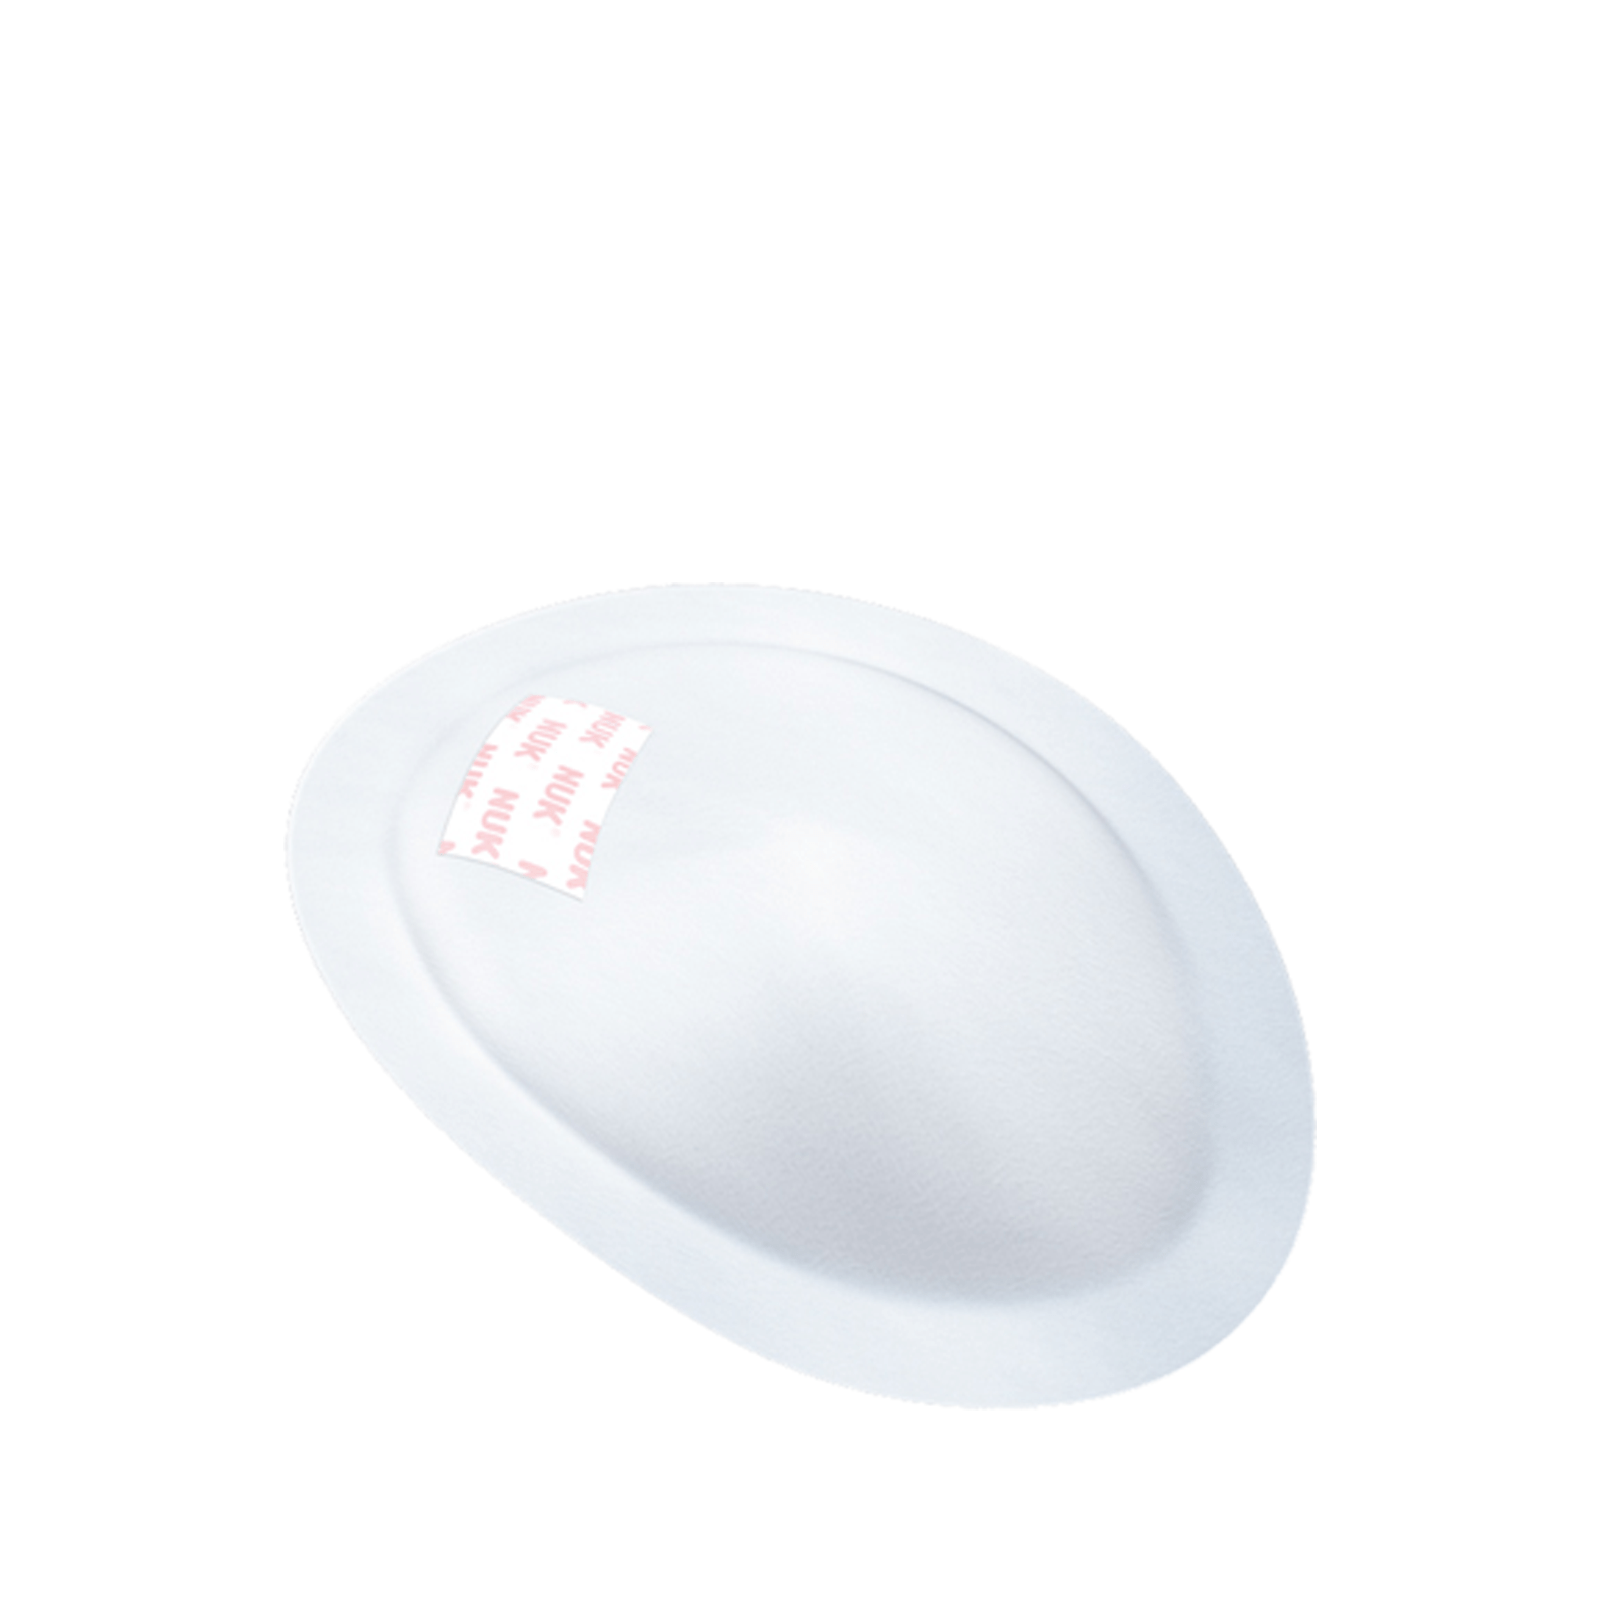 NUK Ultra Dry Breast Pads 30's